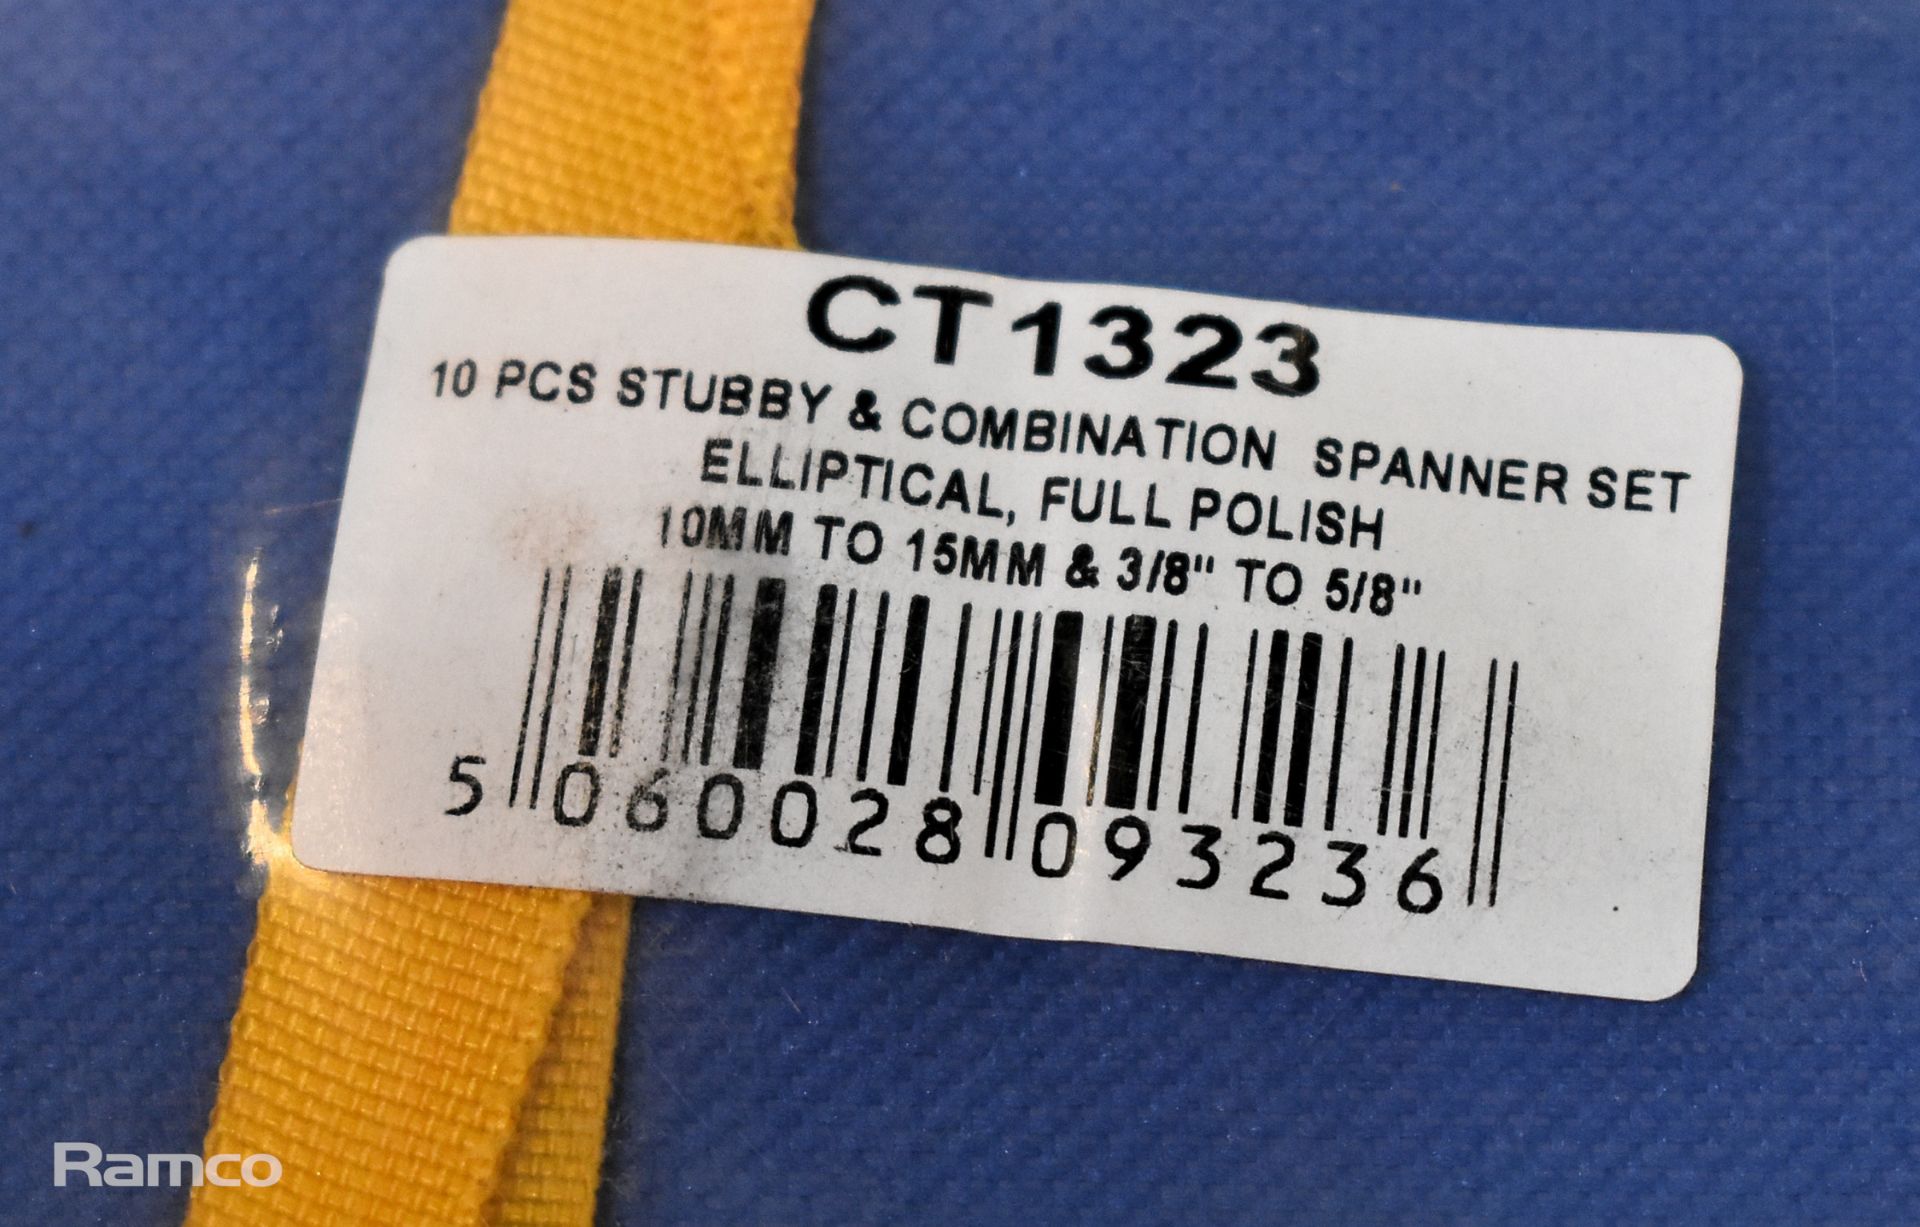 6x 10 piece stubby combination spanners - Image 3 of 3